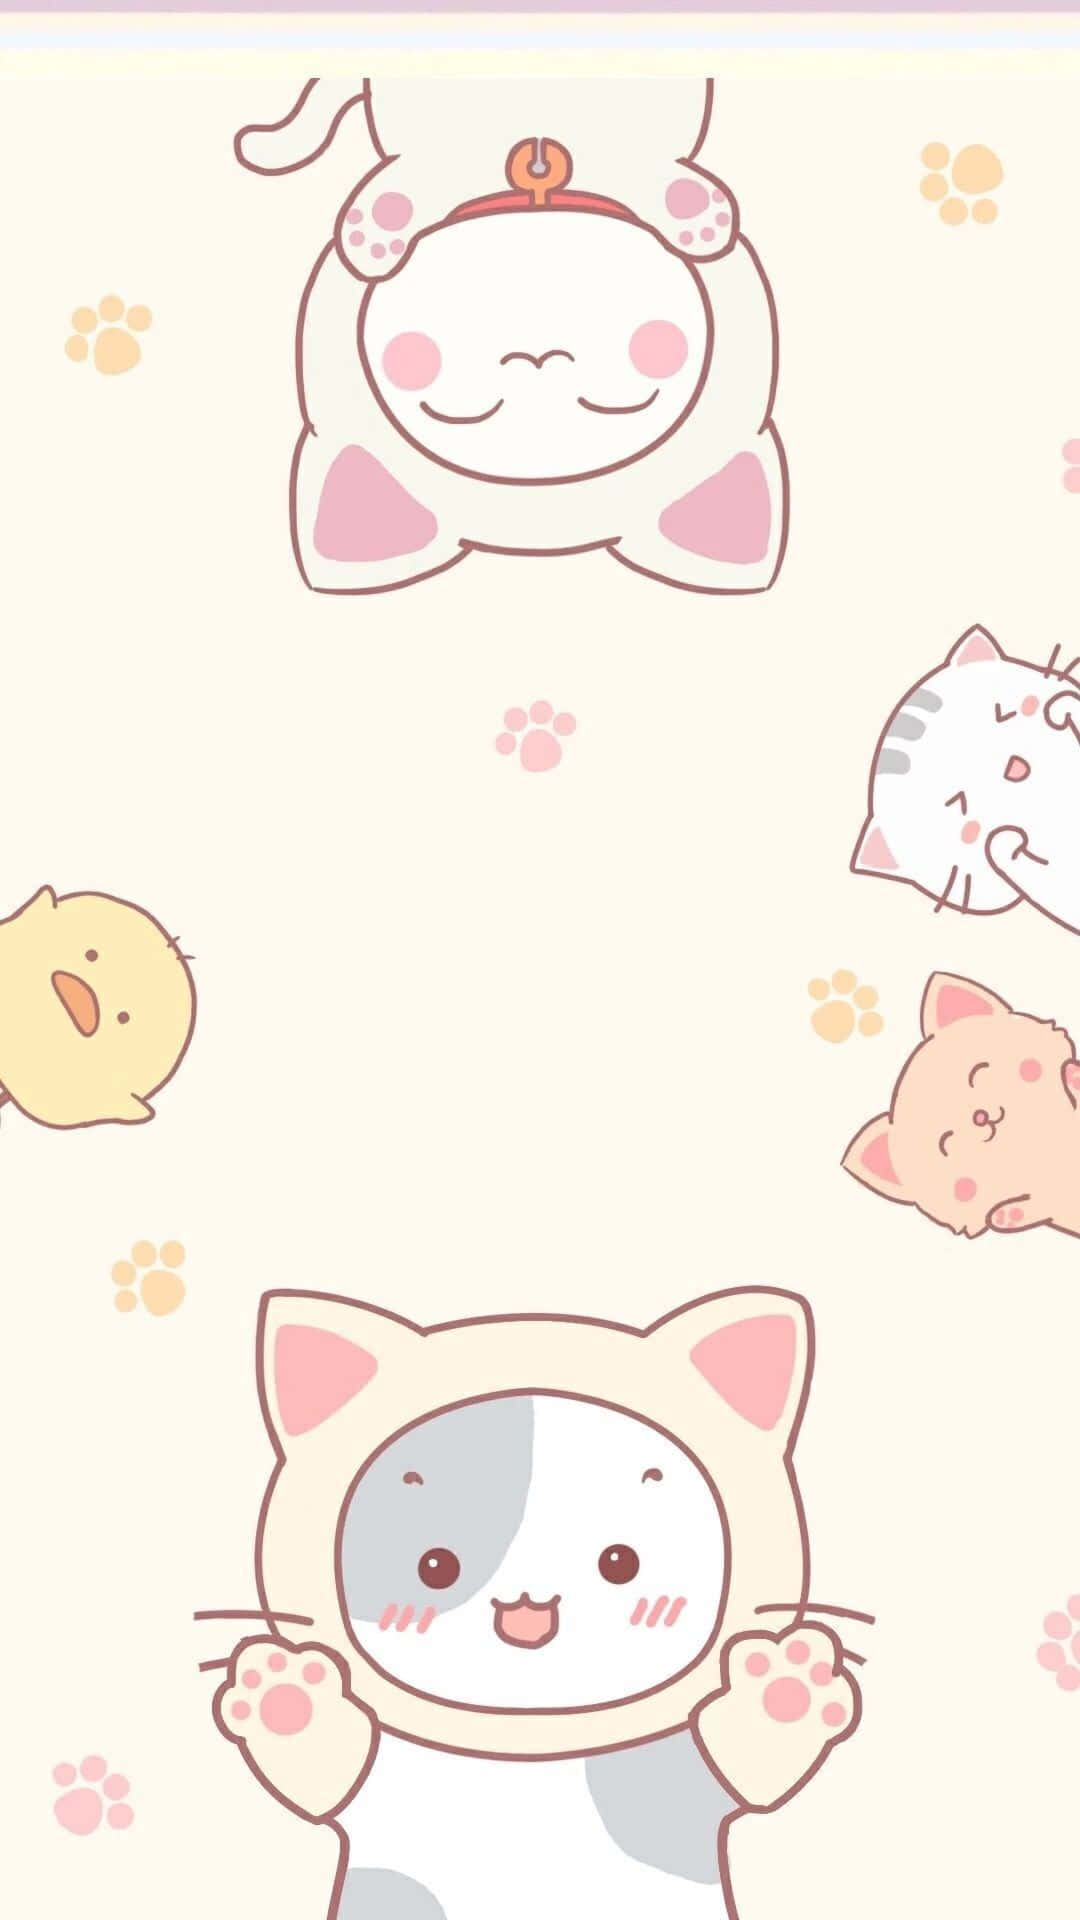 A beautiful pastel background to brighten up your day!